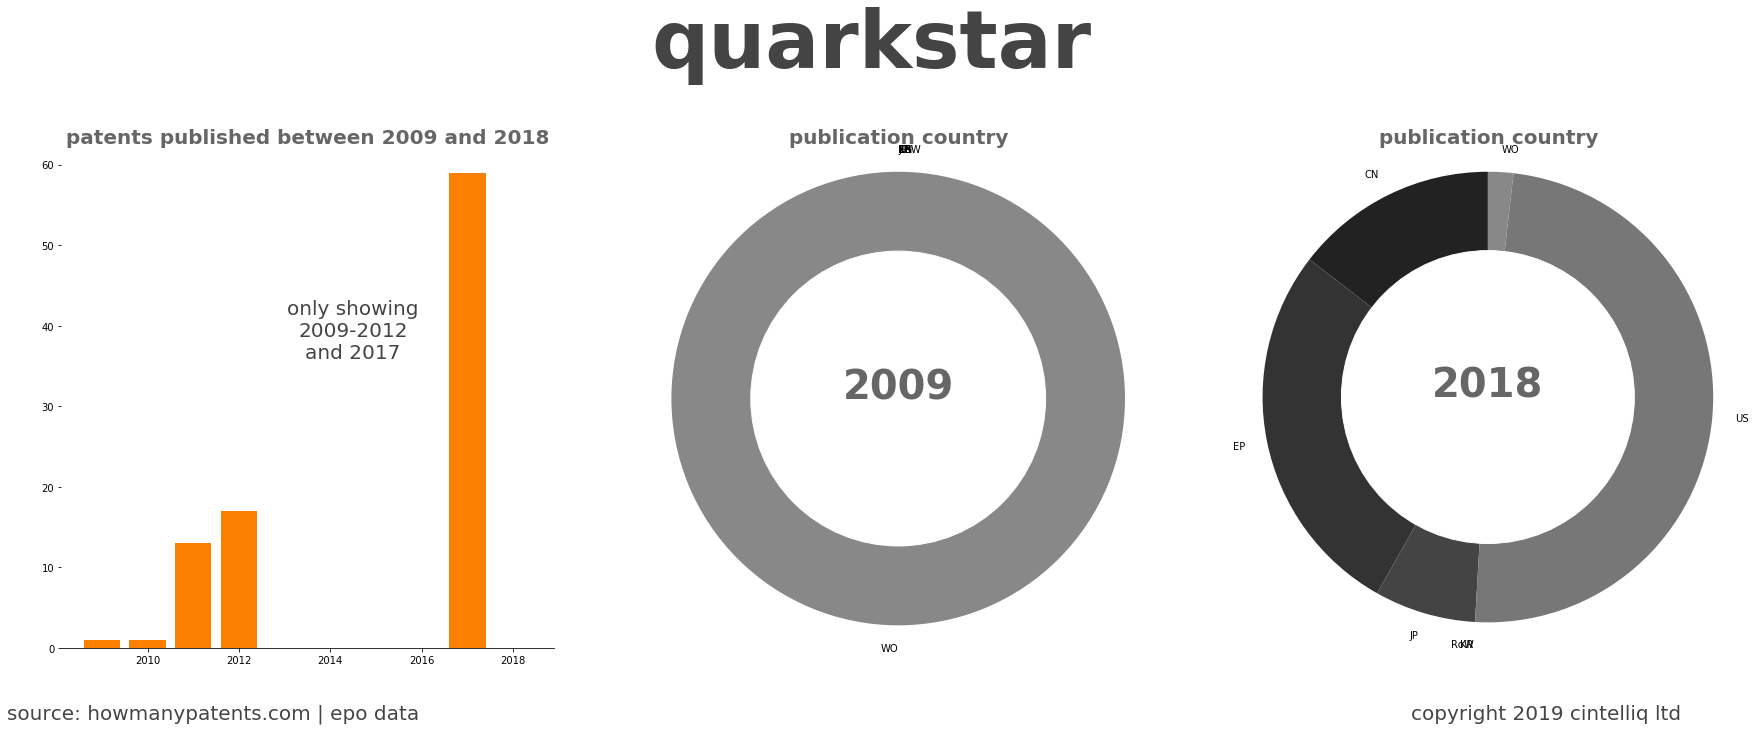 summary of patents for Quarkstar